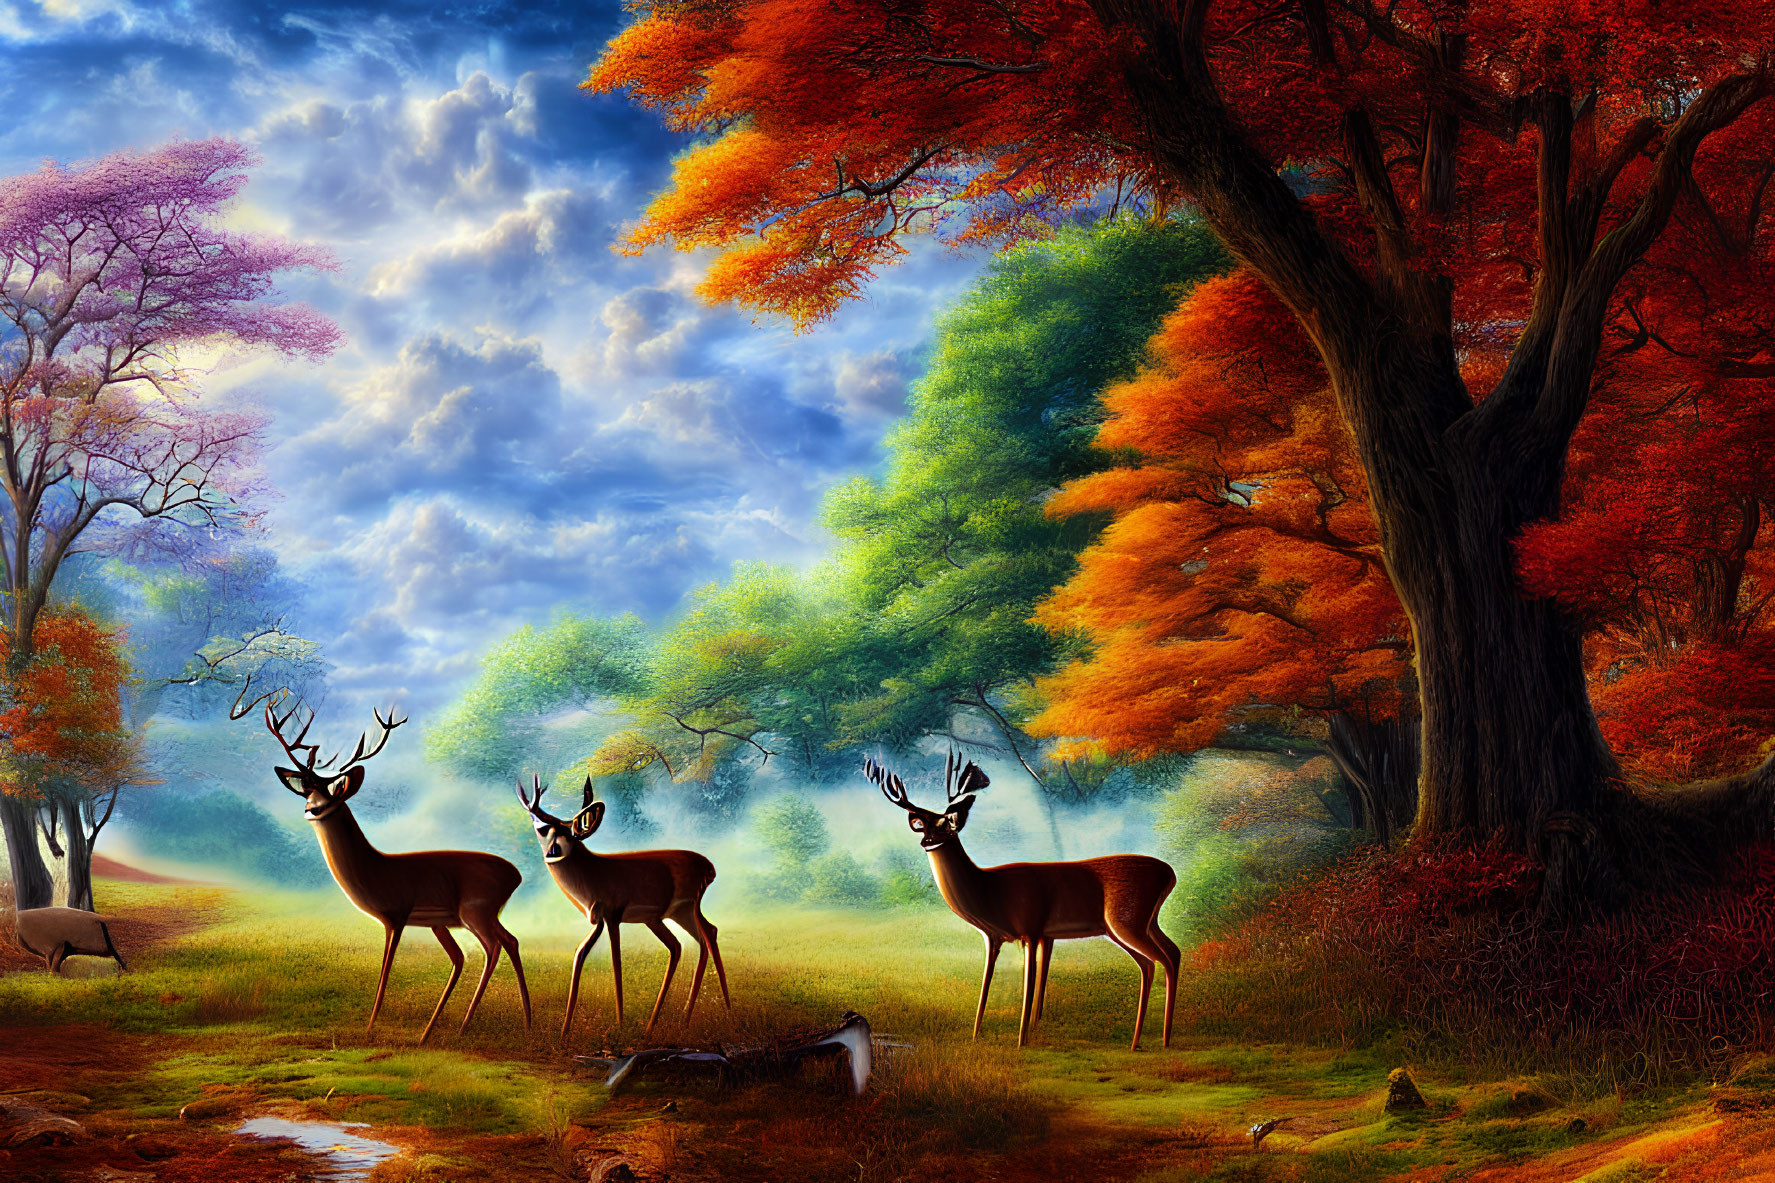 Autumn forest scene with three deer and colorful trees